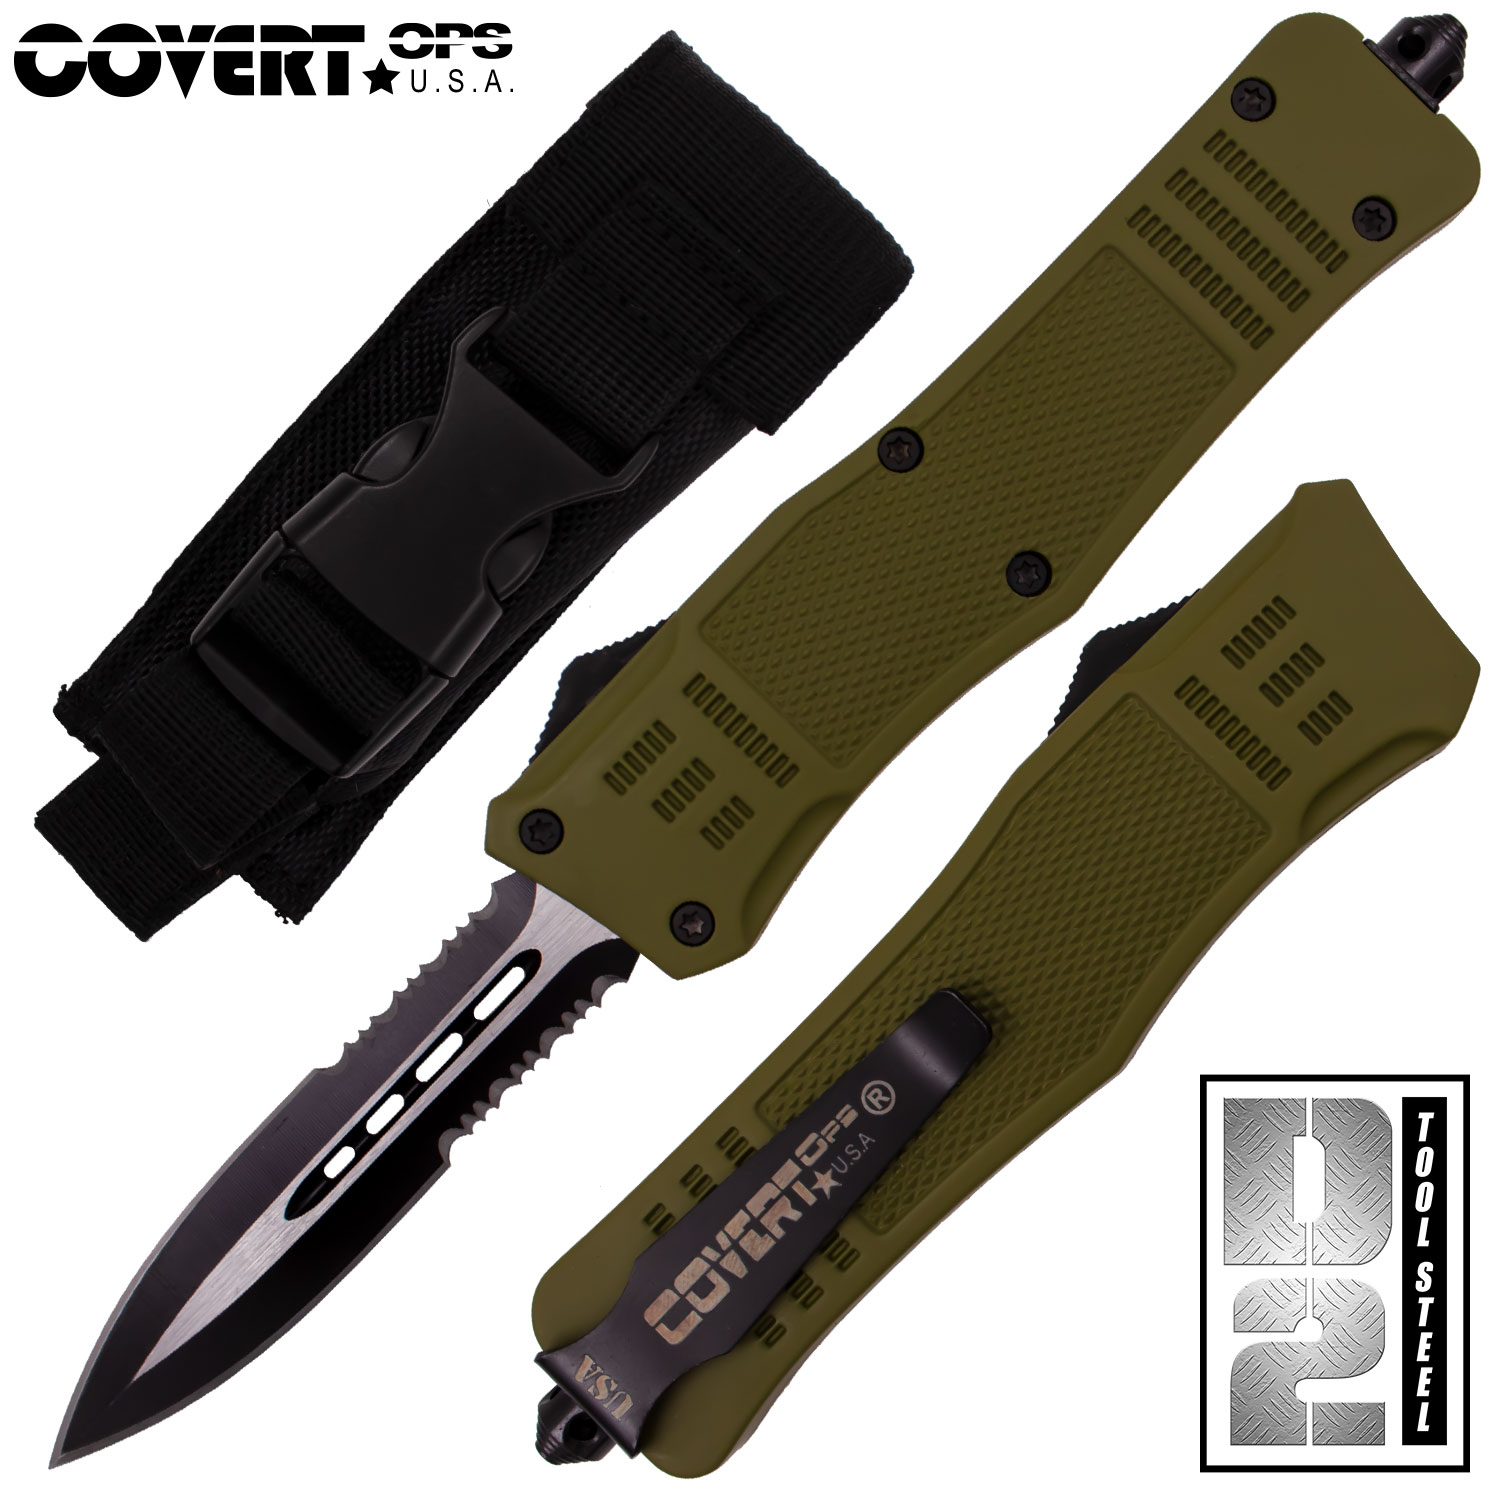 Covert OPS USA OTF Automatic Knife 9 inch Green D2 Steel Blade DEdge